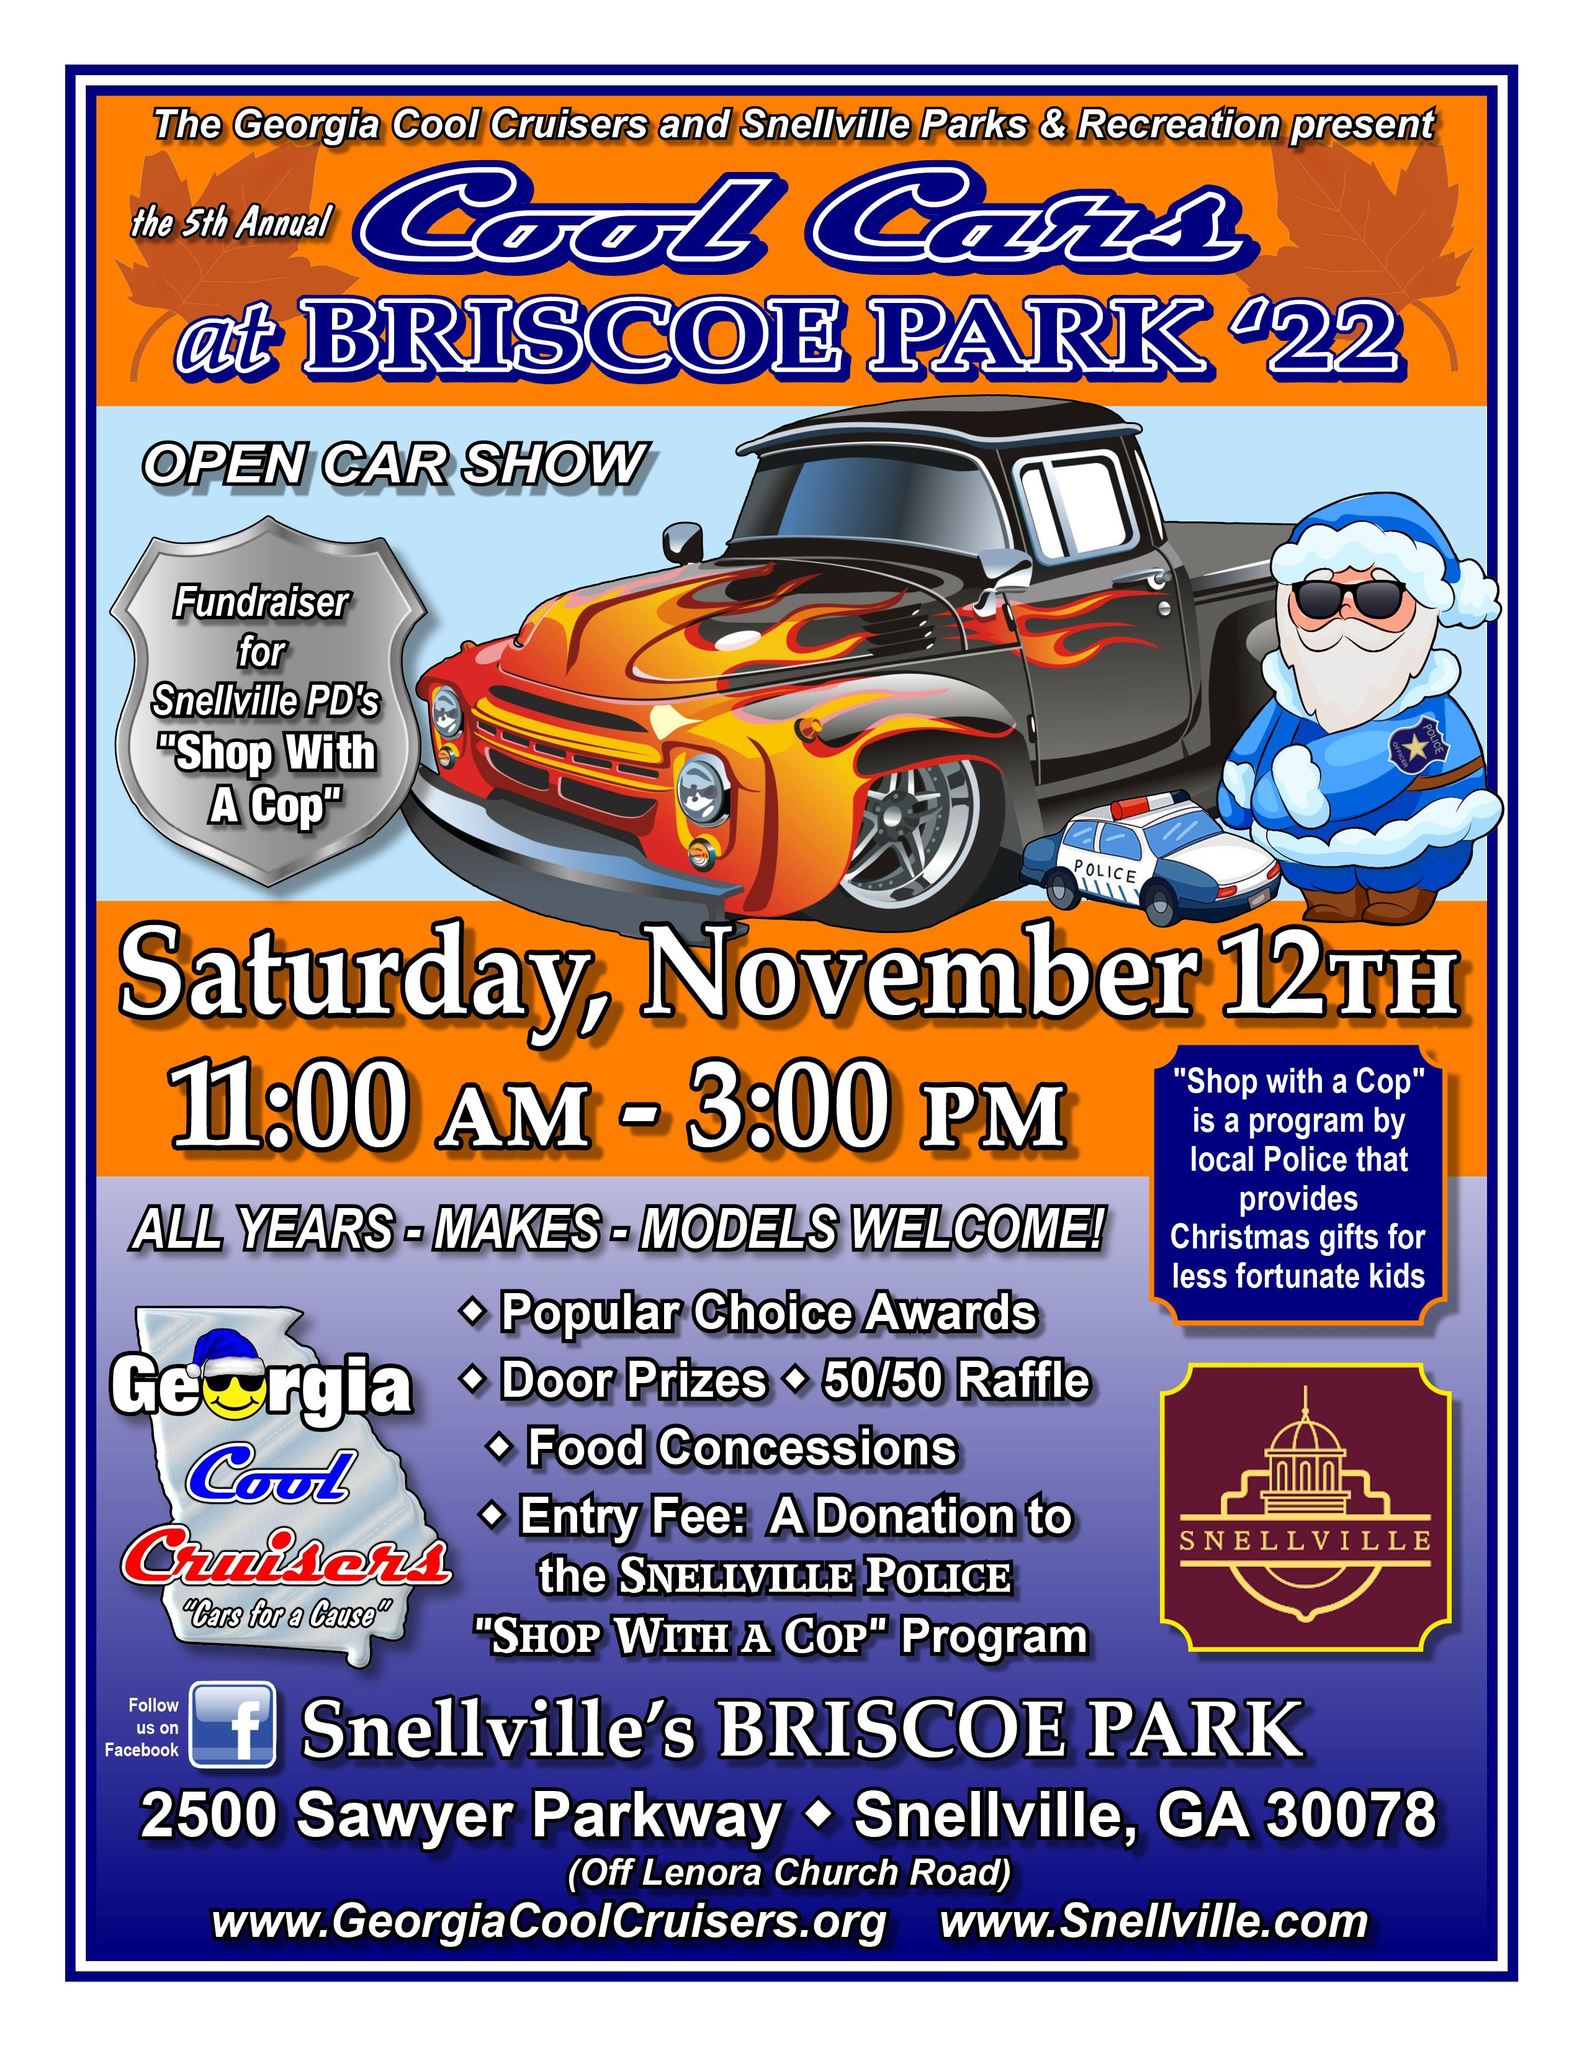 Cool-Cars-at-Briscoe-Park-in-Snellville